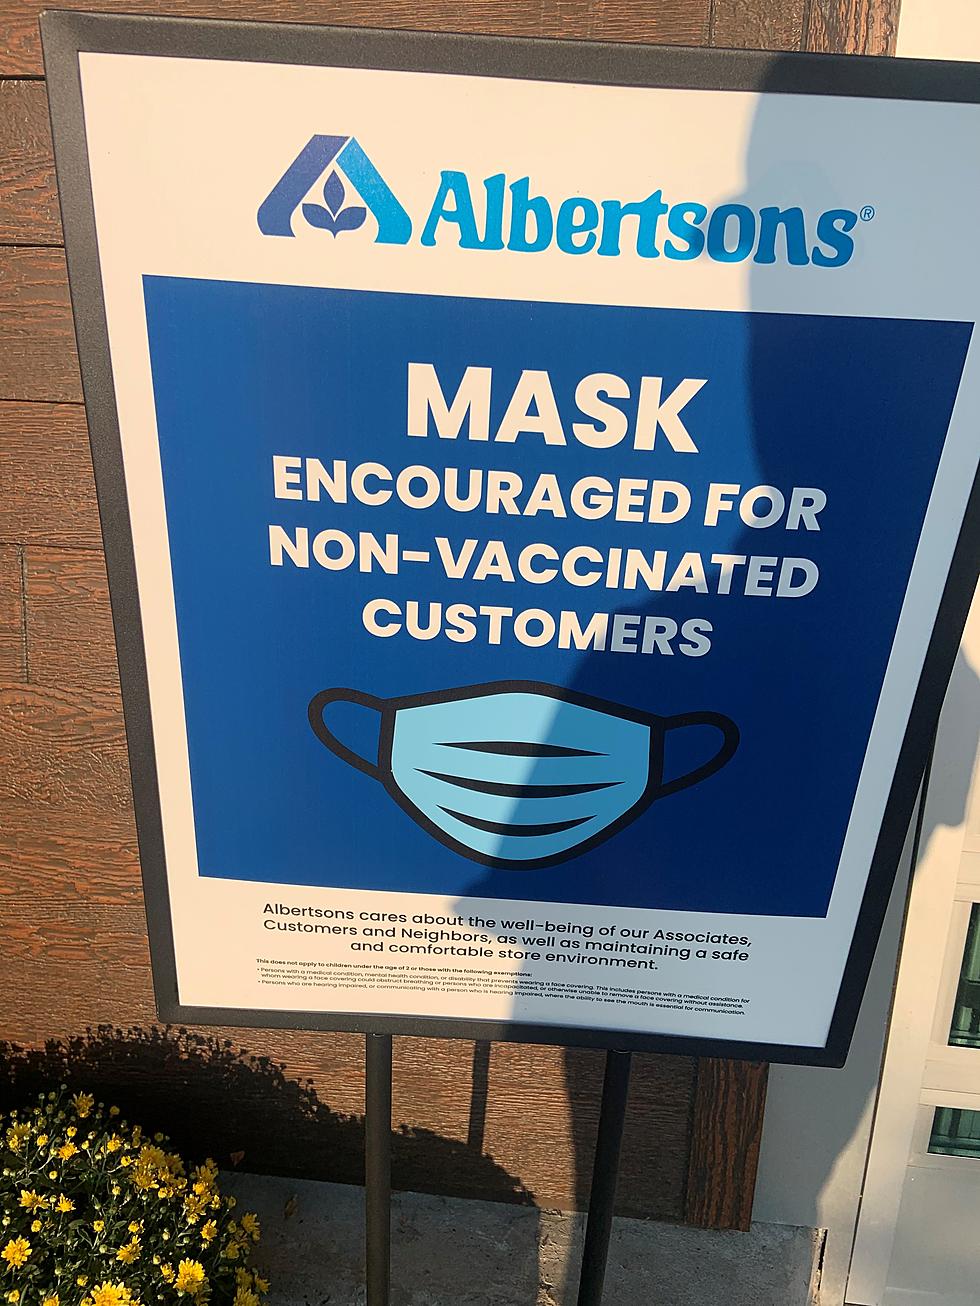 Did Boise Albertsons Change Their Mask Policy?